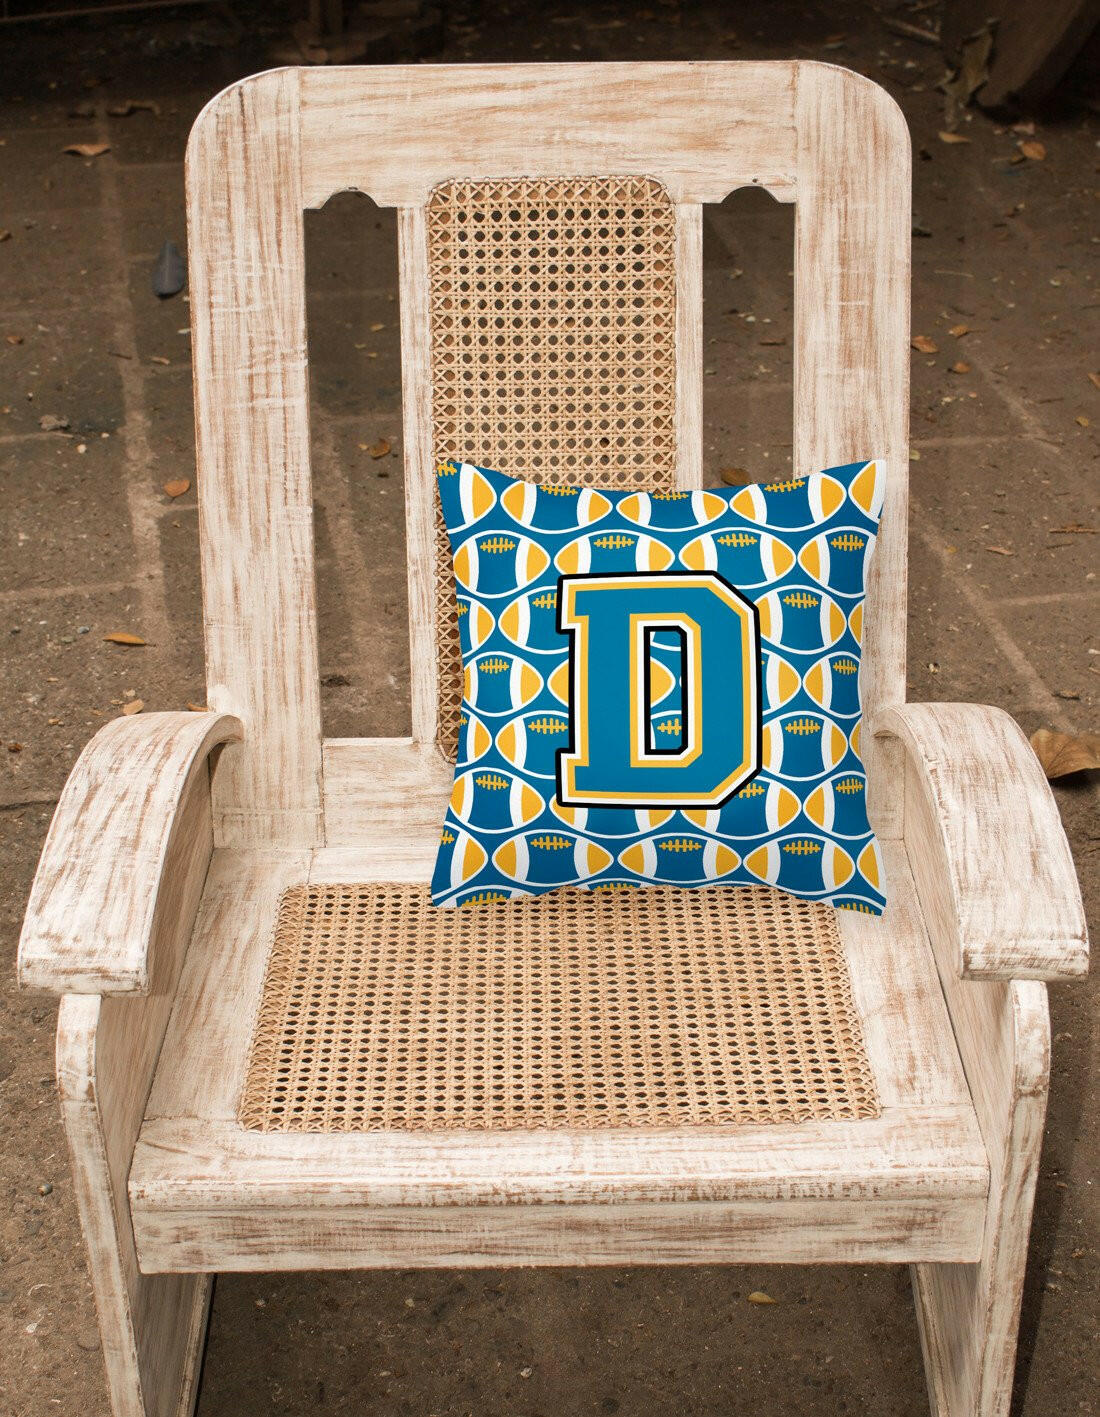 Letter D Football Blue and Gold Fabric Decorative Pillow CJ1077-DPW1414 by Caroline's Treasures